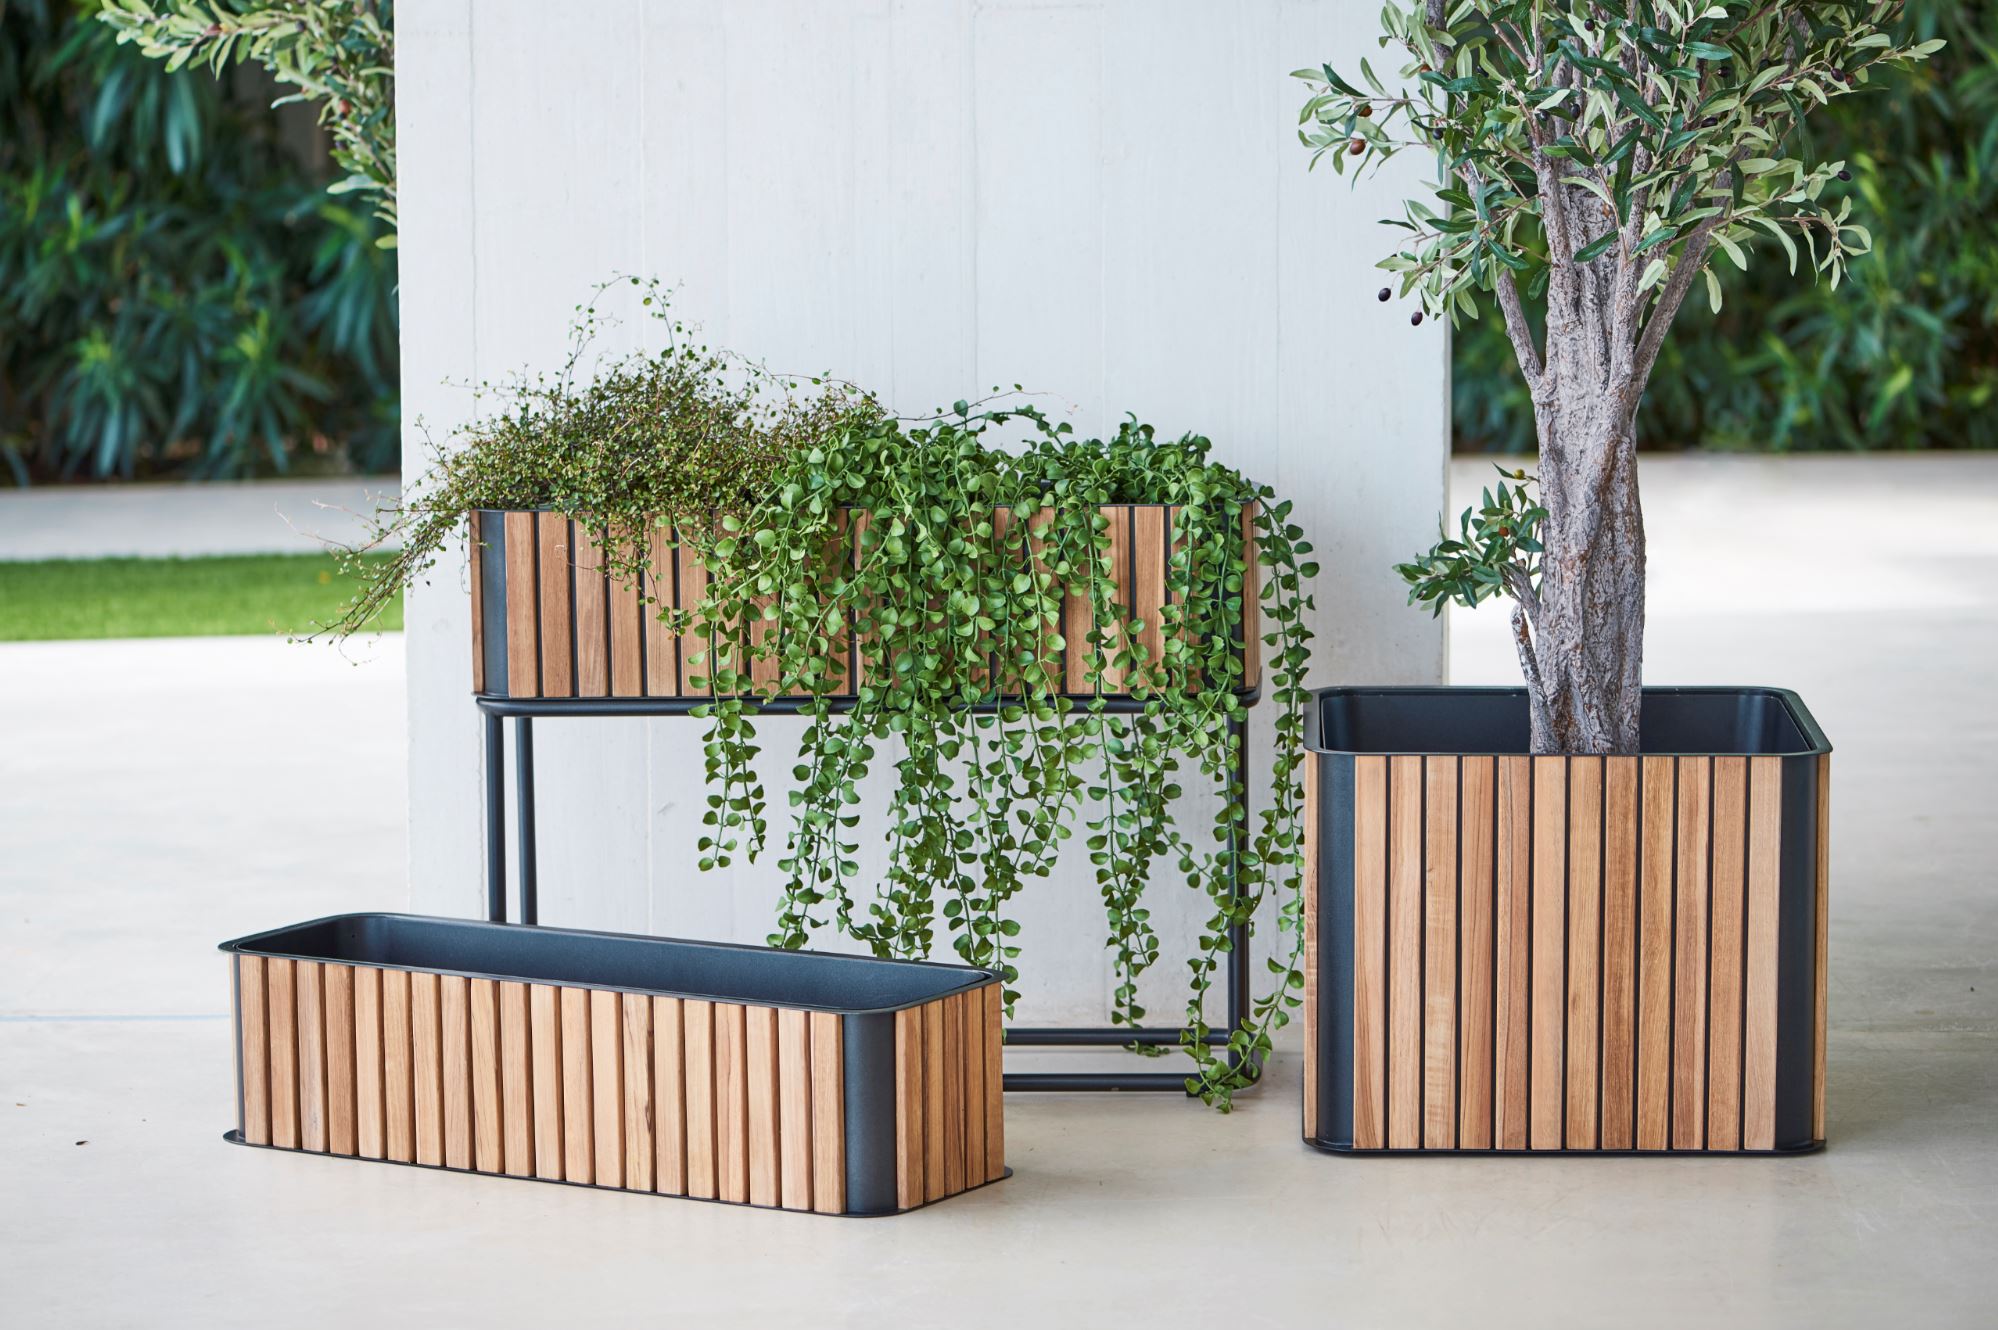 How to use large outdoor planters?